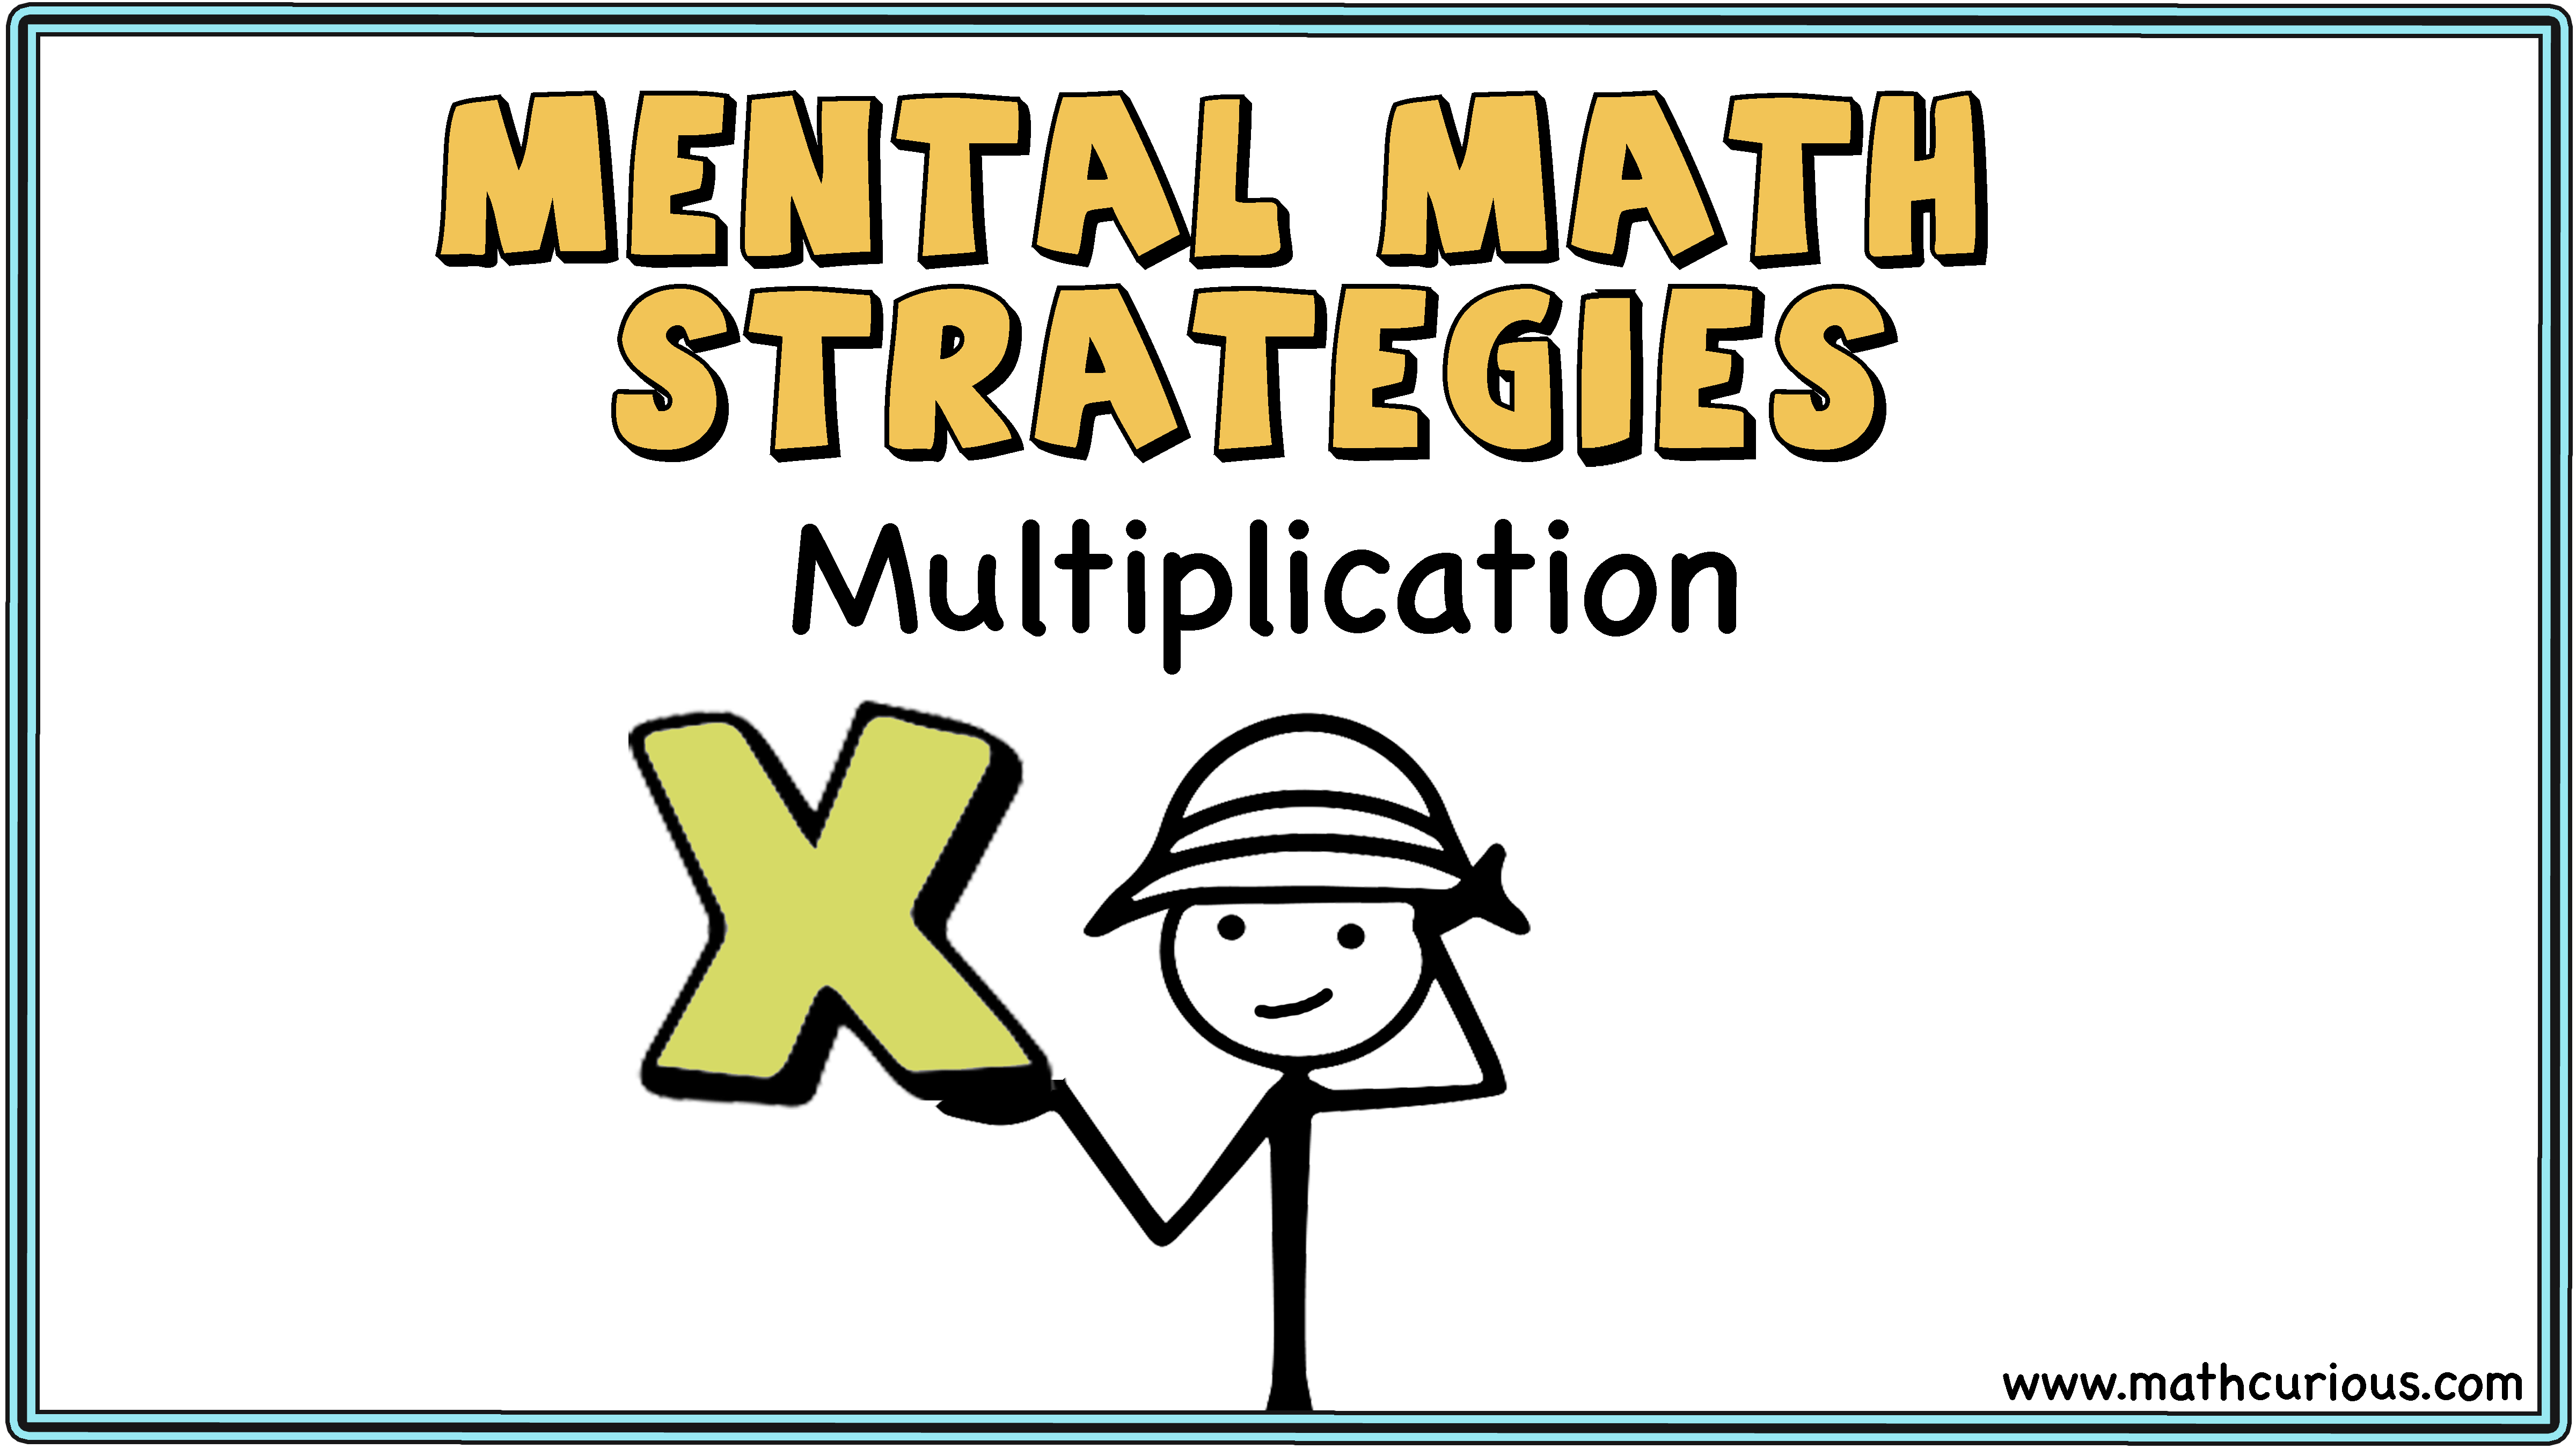 What Are Mental Math Strategies